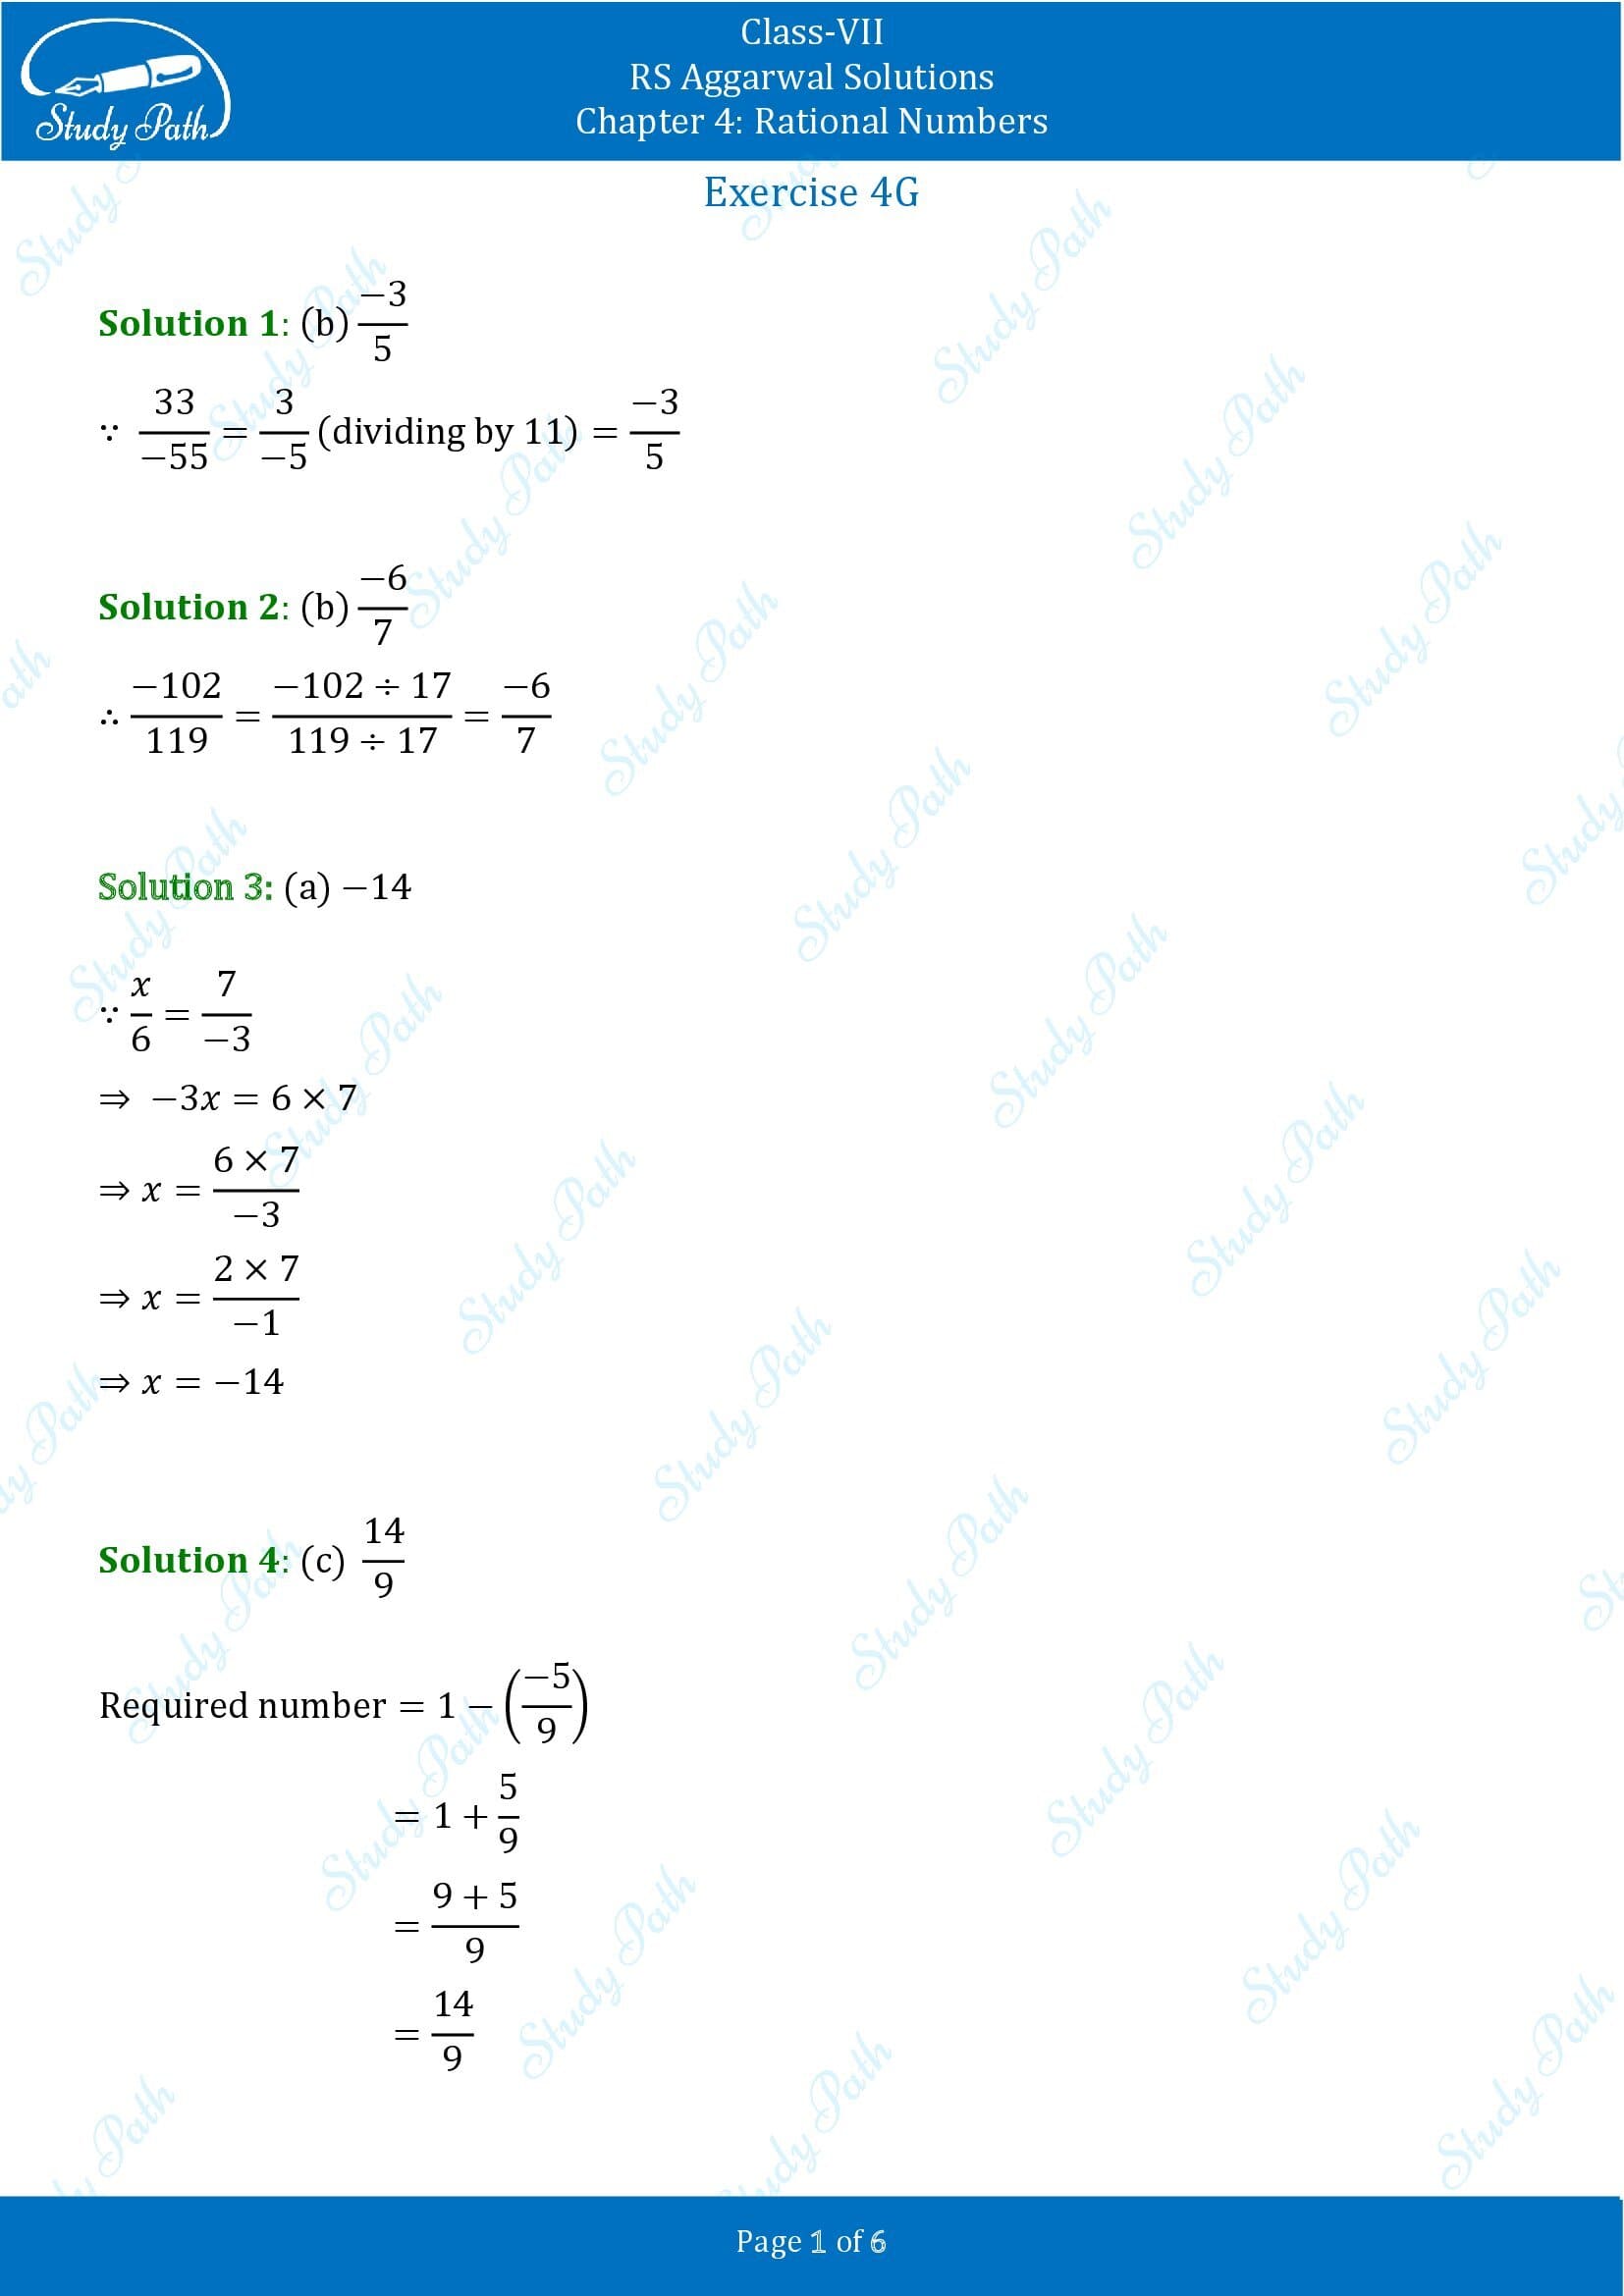 RS Aggarwal Solutions Class 7 Chapter 4 Rational Numbers Exercise 4G MCQ 0001